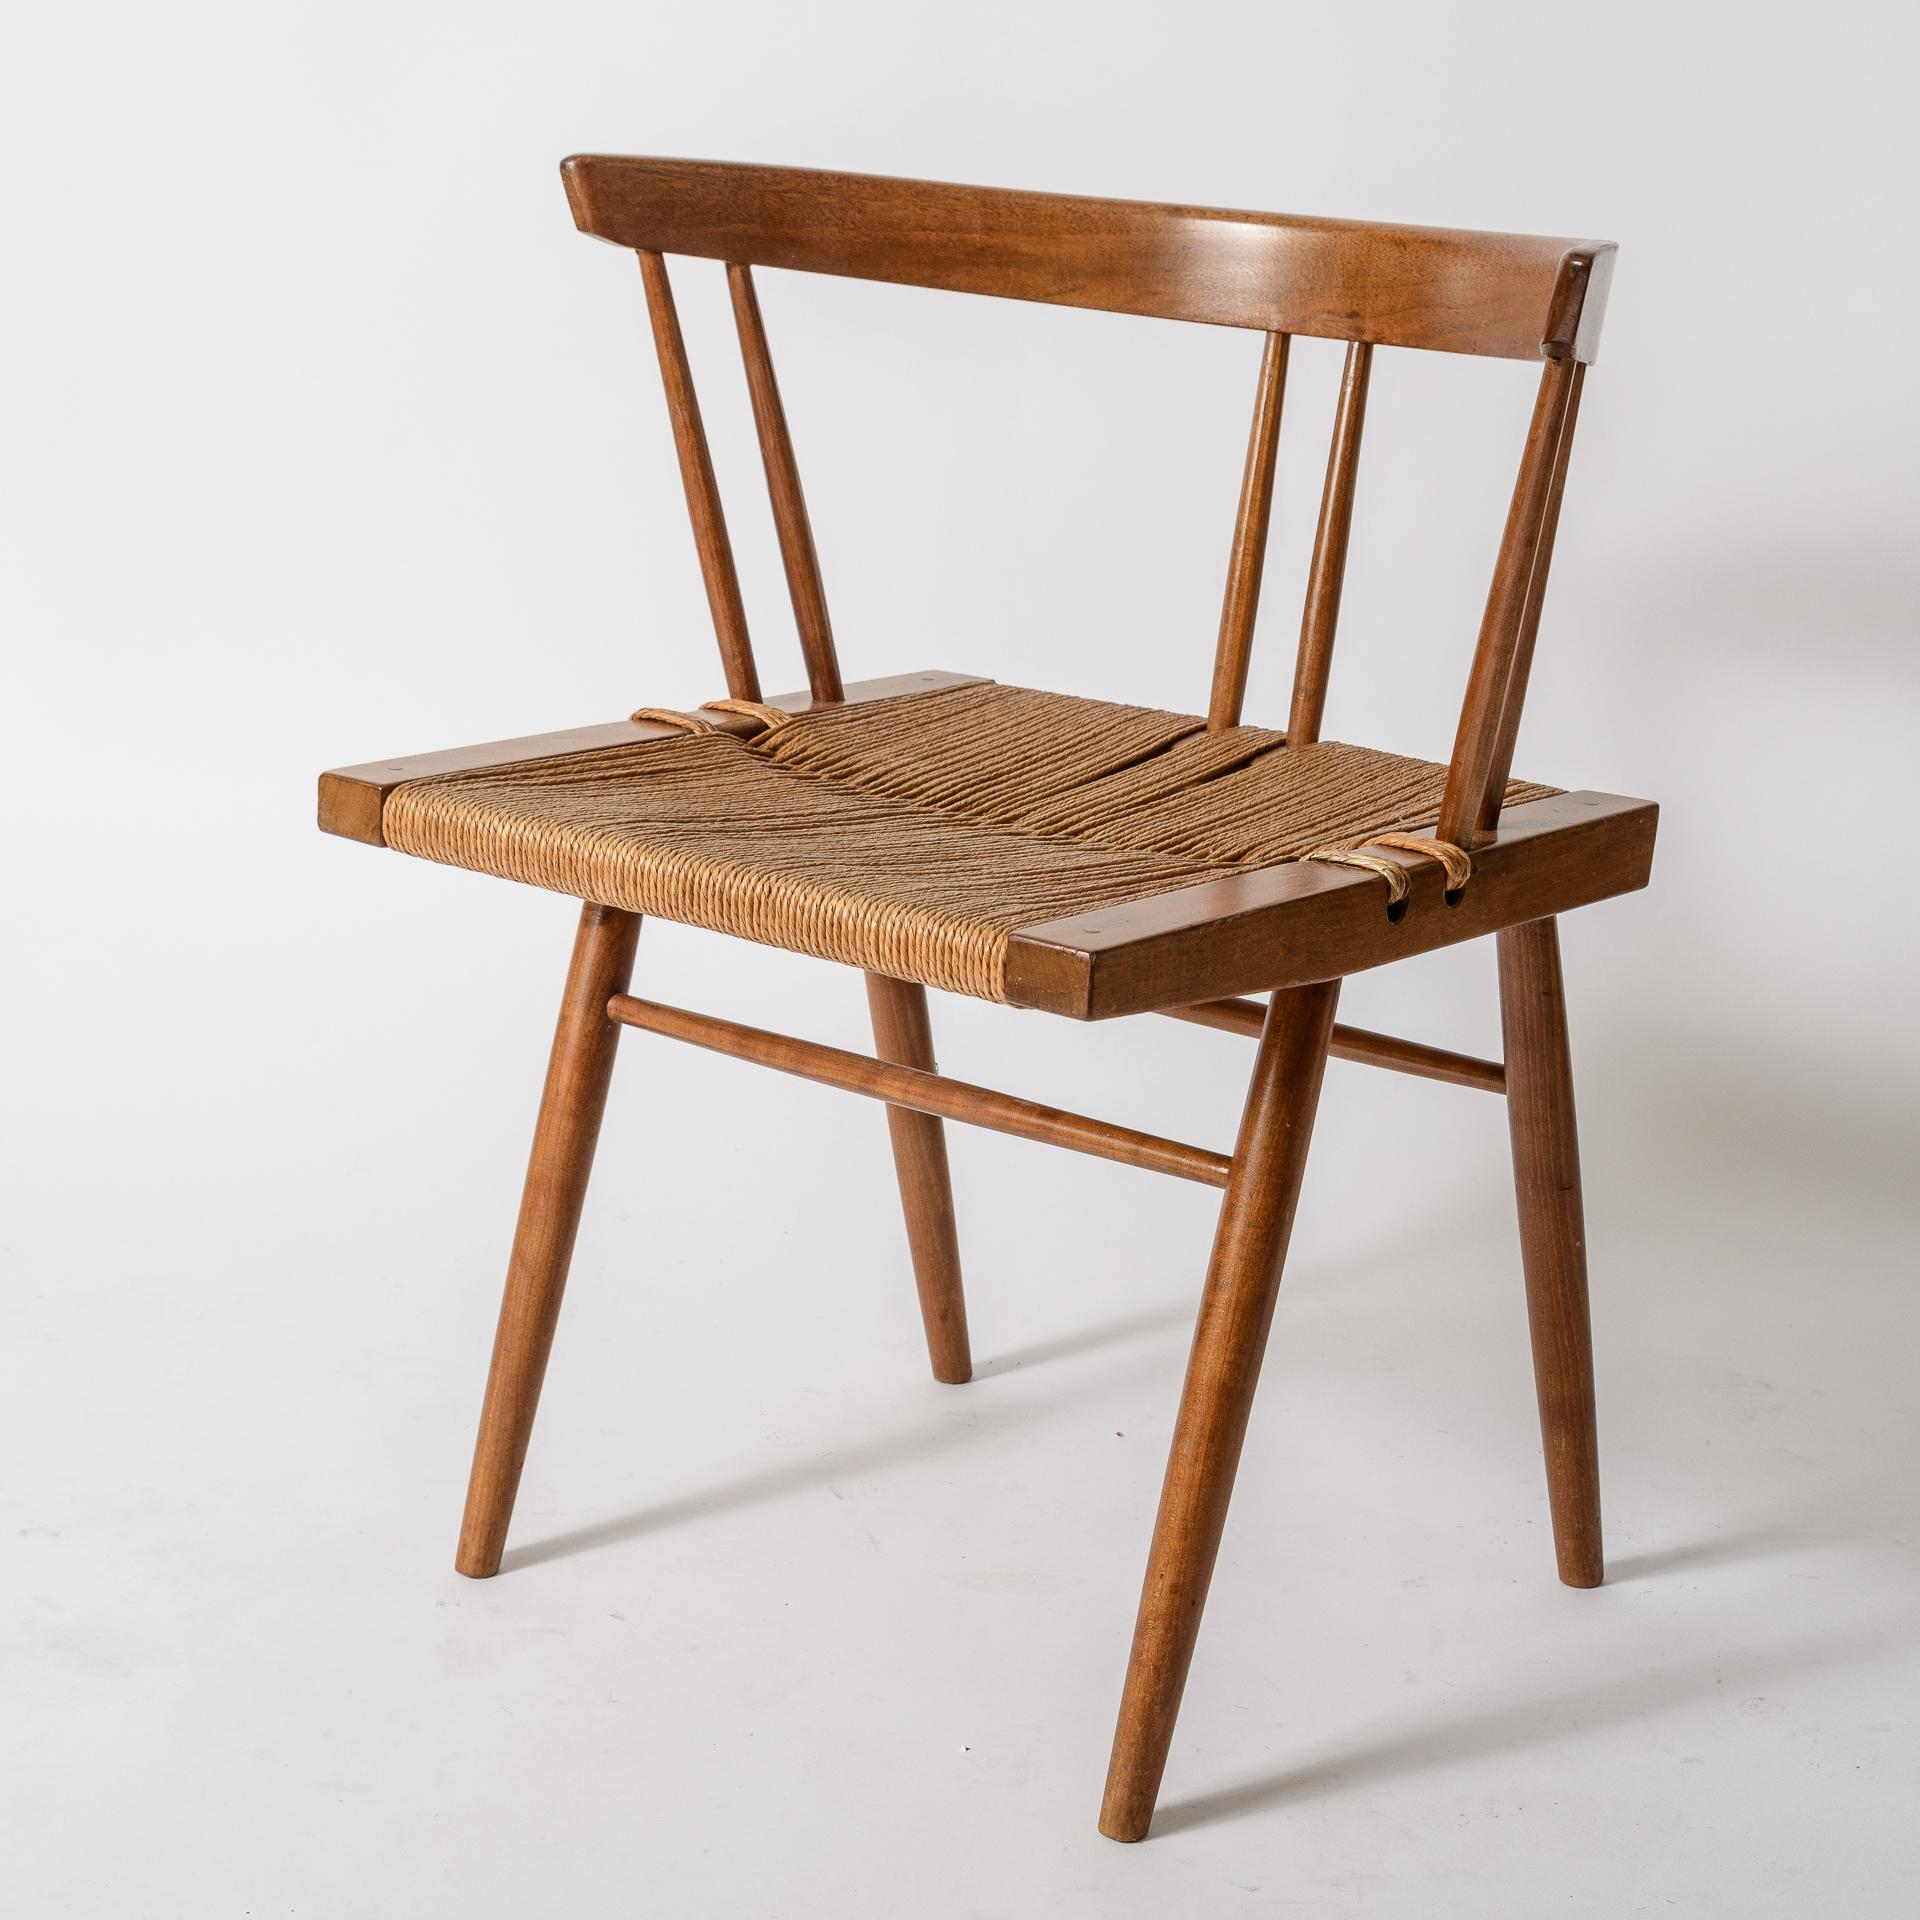 George Nakashima Grass Seat Chairs In Good Condition For Sale In West Palm Beach, FL